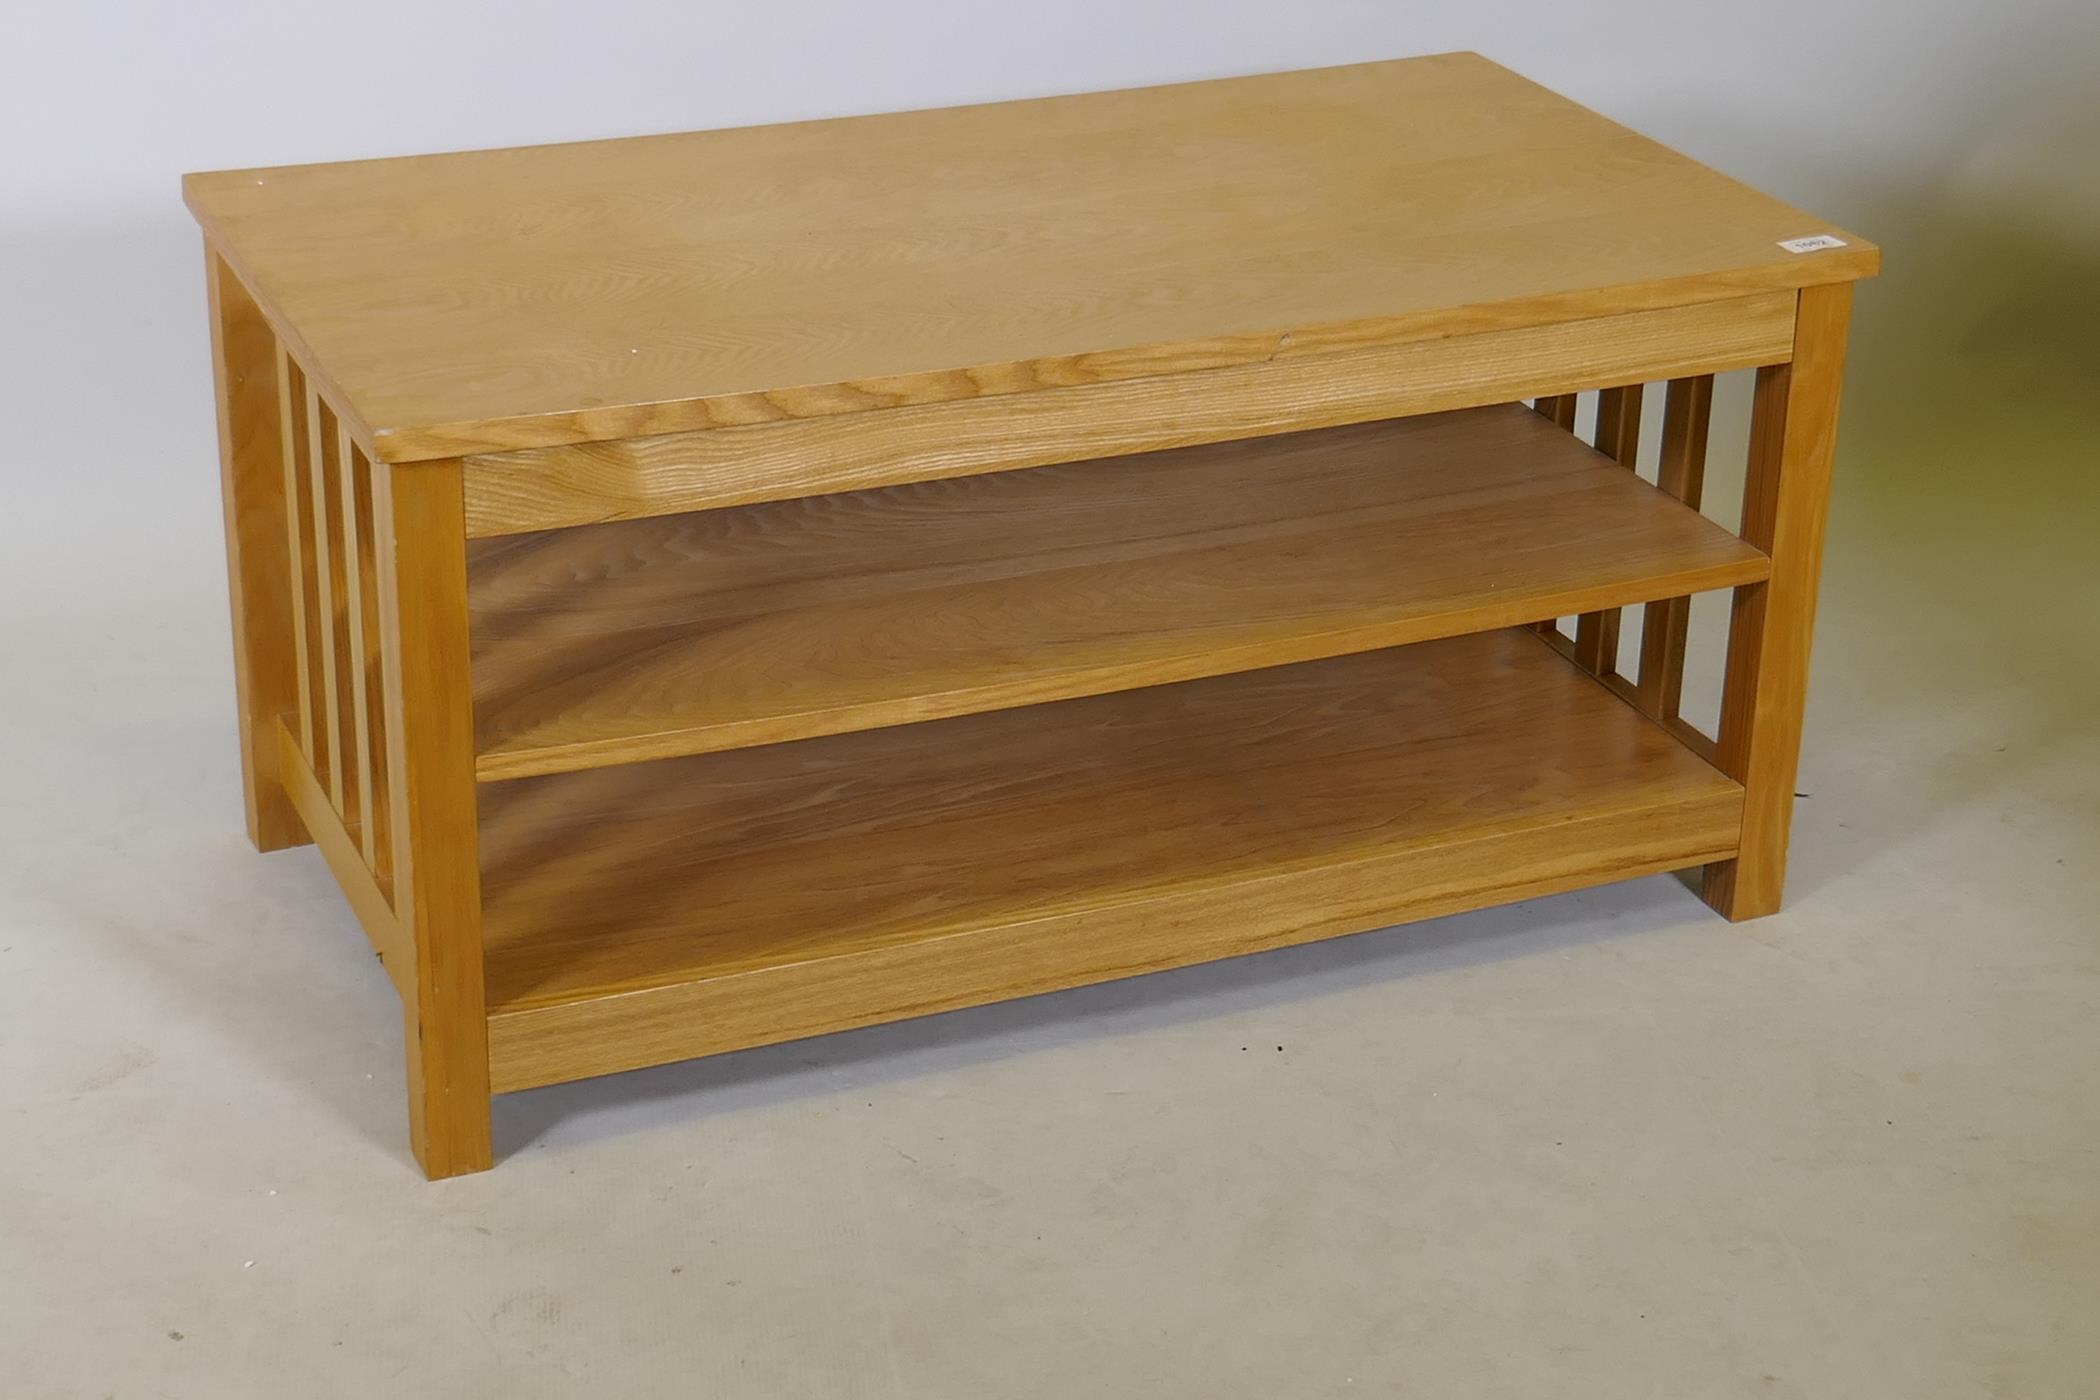 A contemporary light oak three tier coffee table with slatted ends, 20" x 36" x 18"